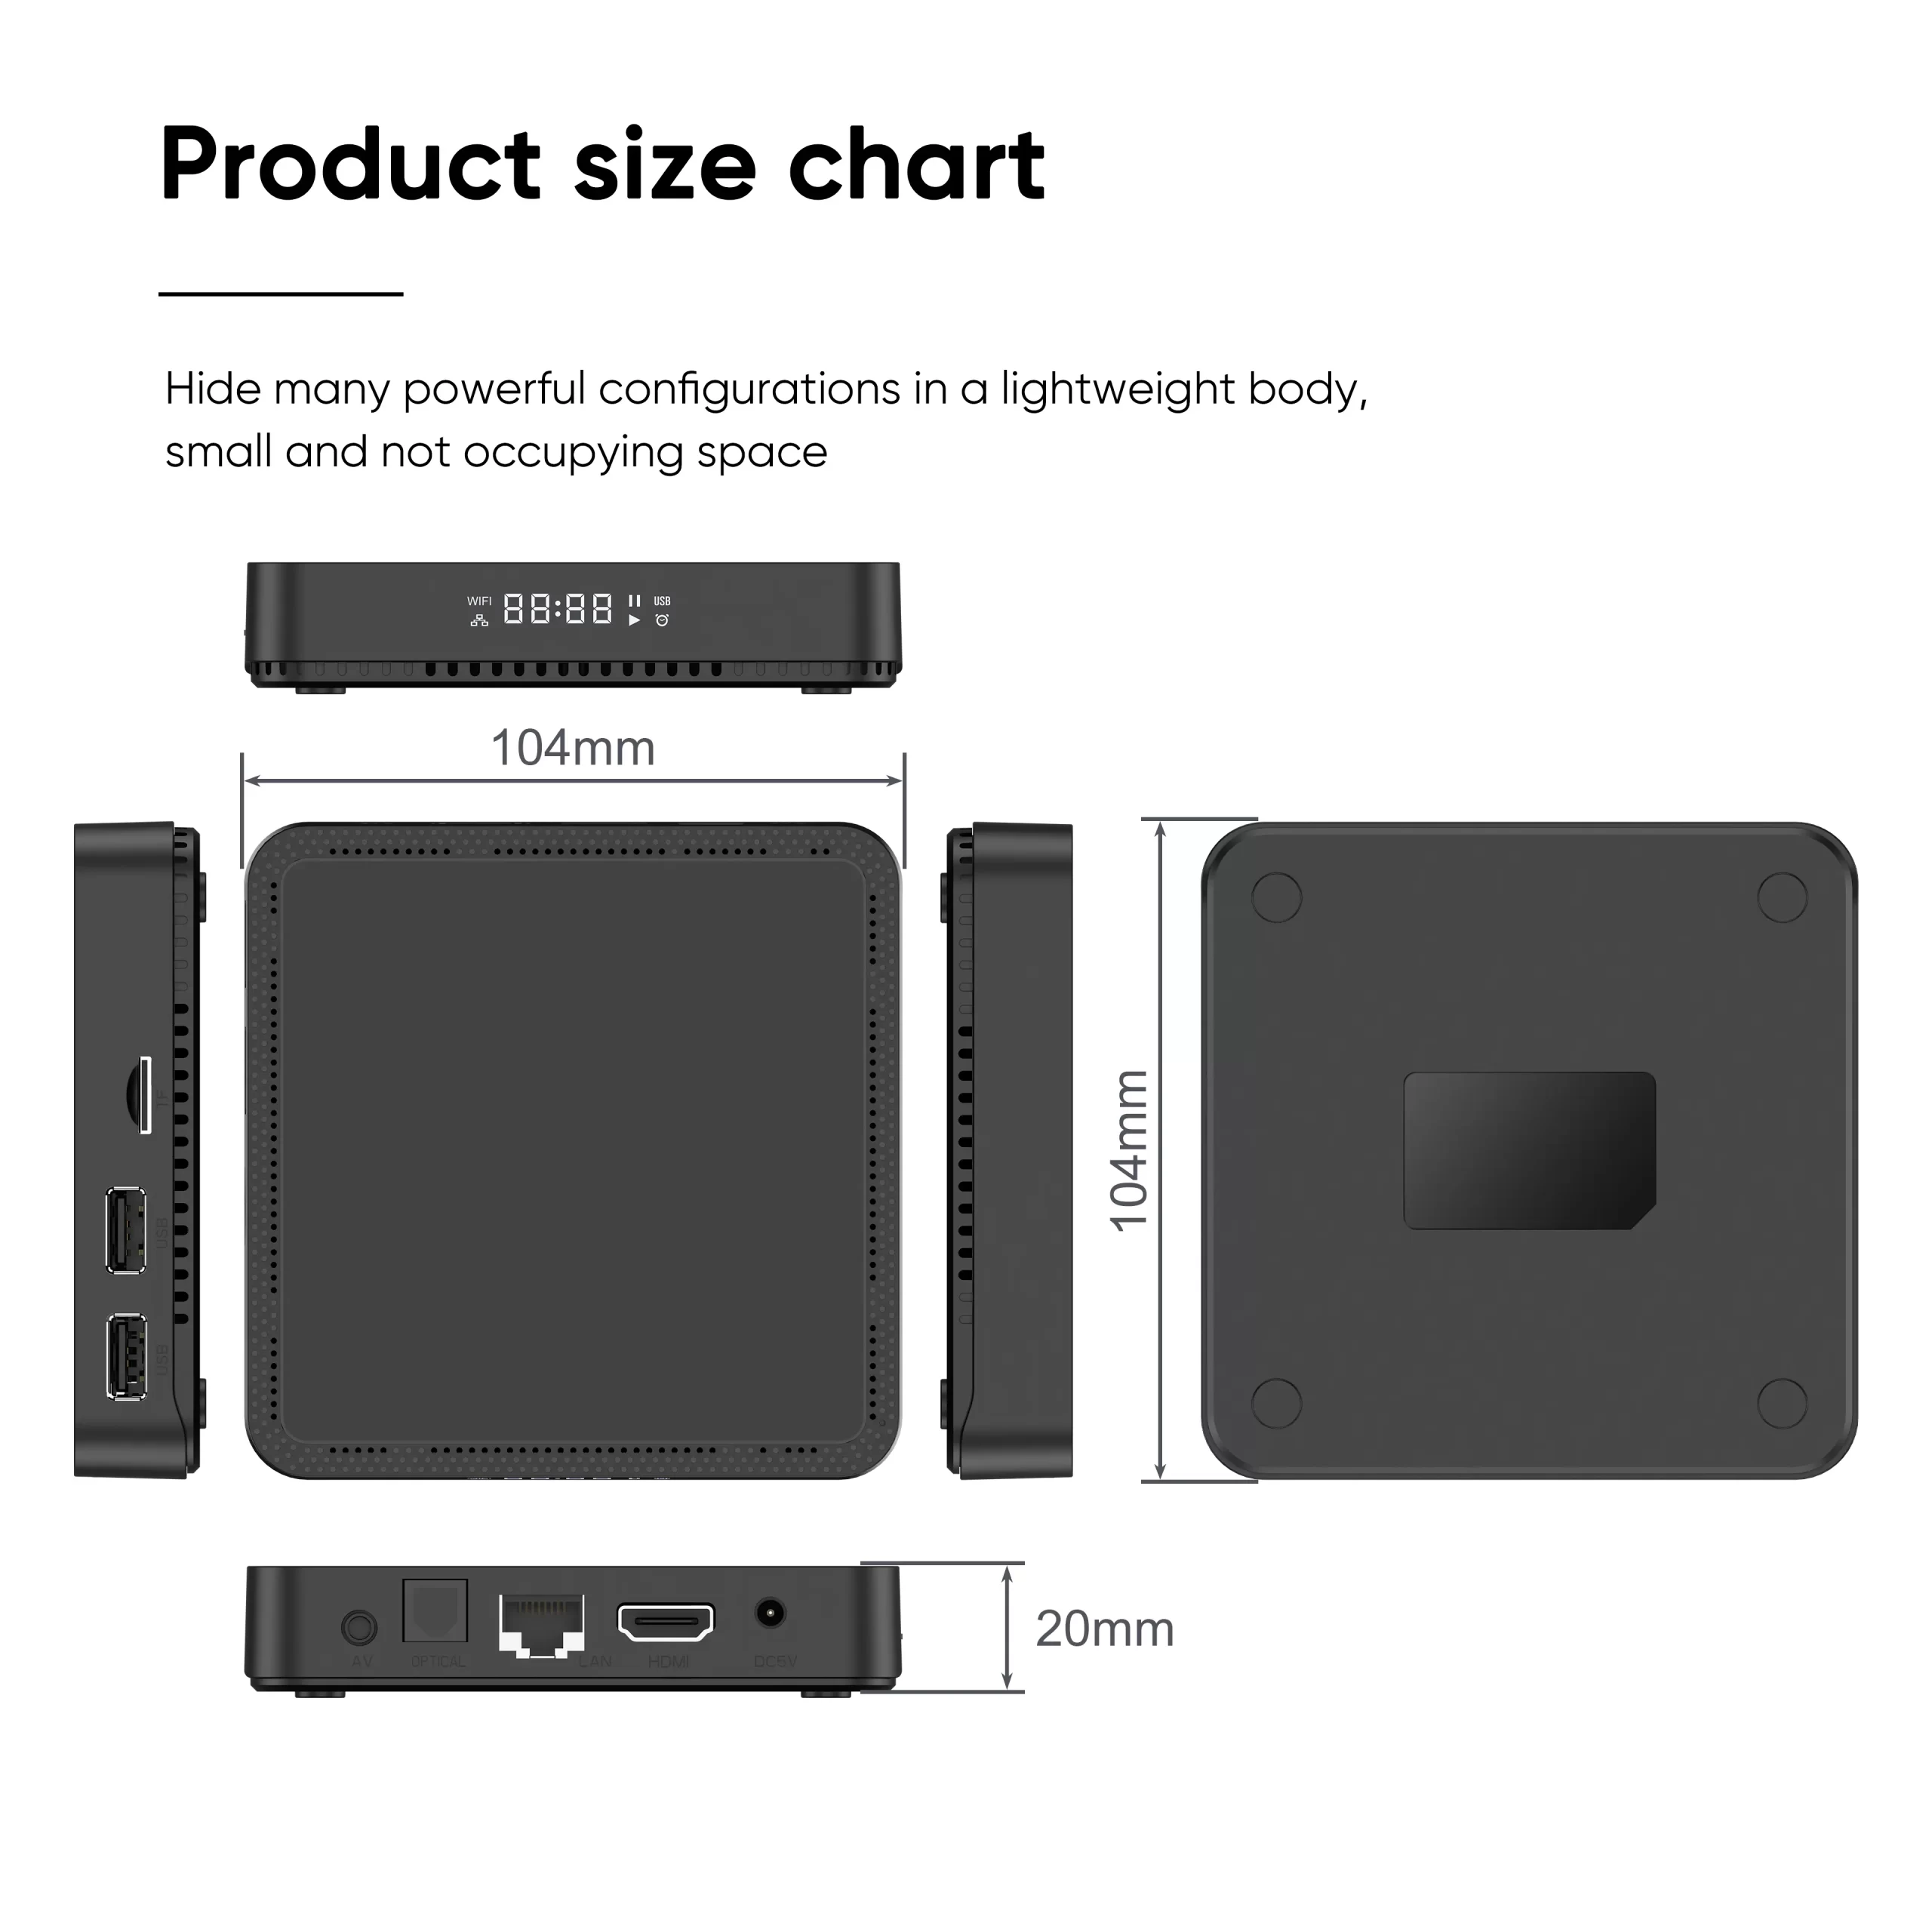 Latest Chinese Android TV Box model